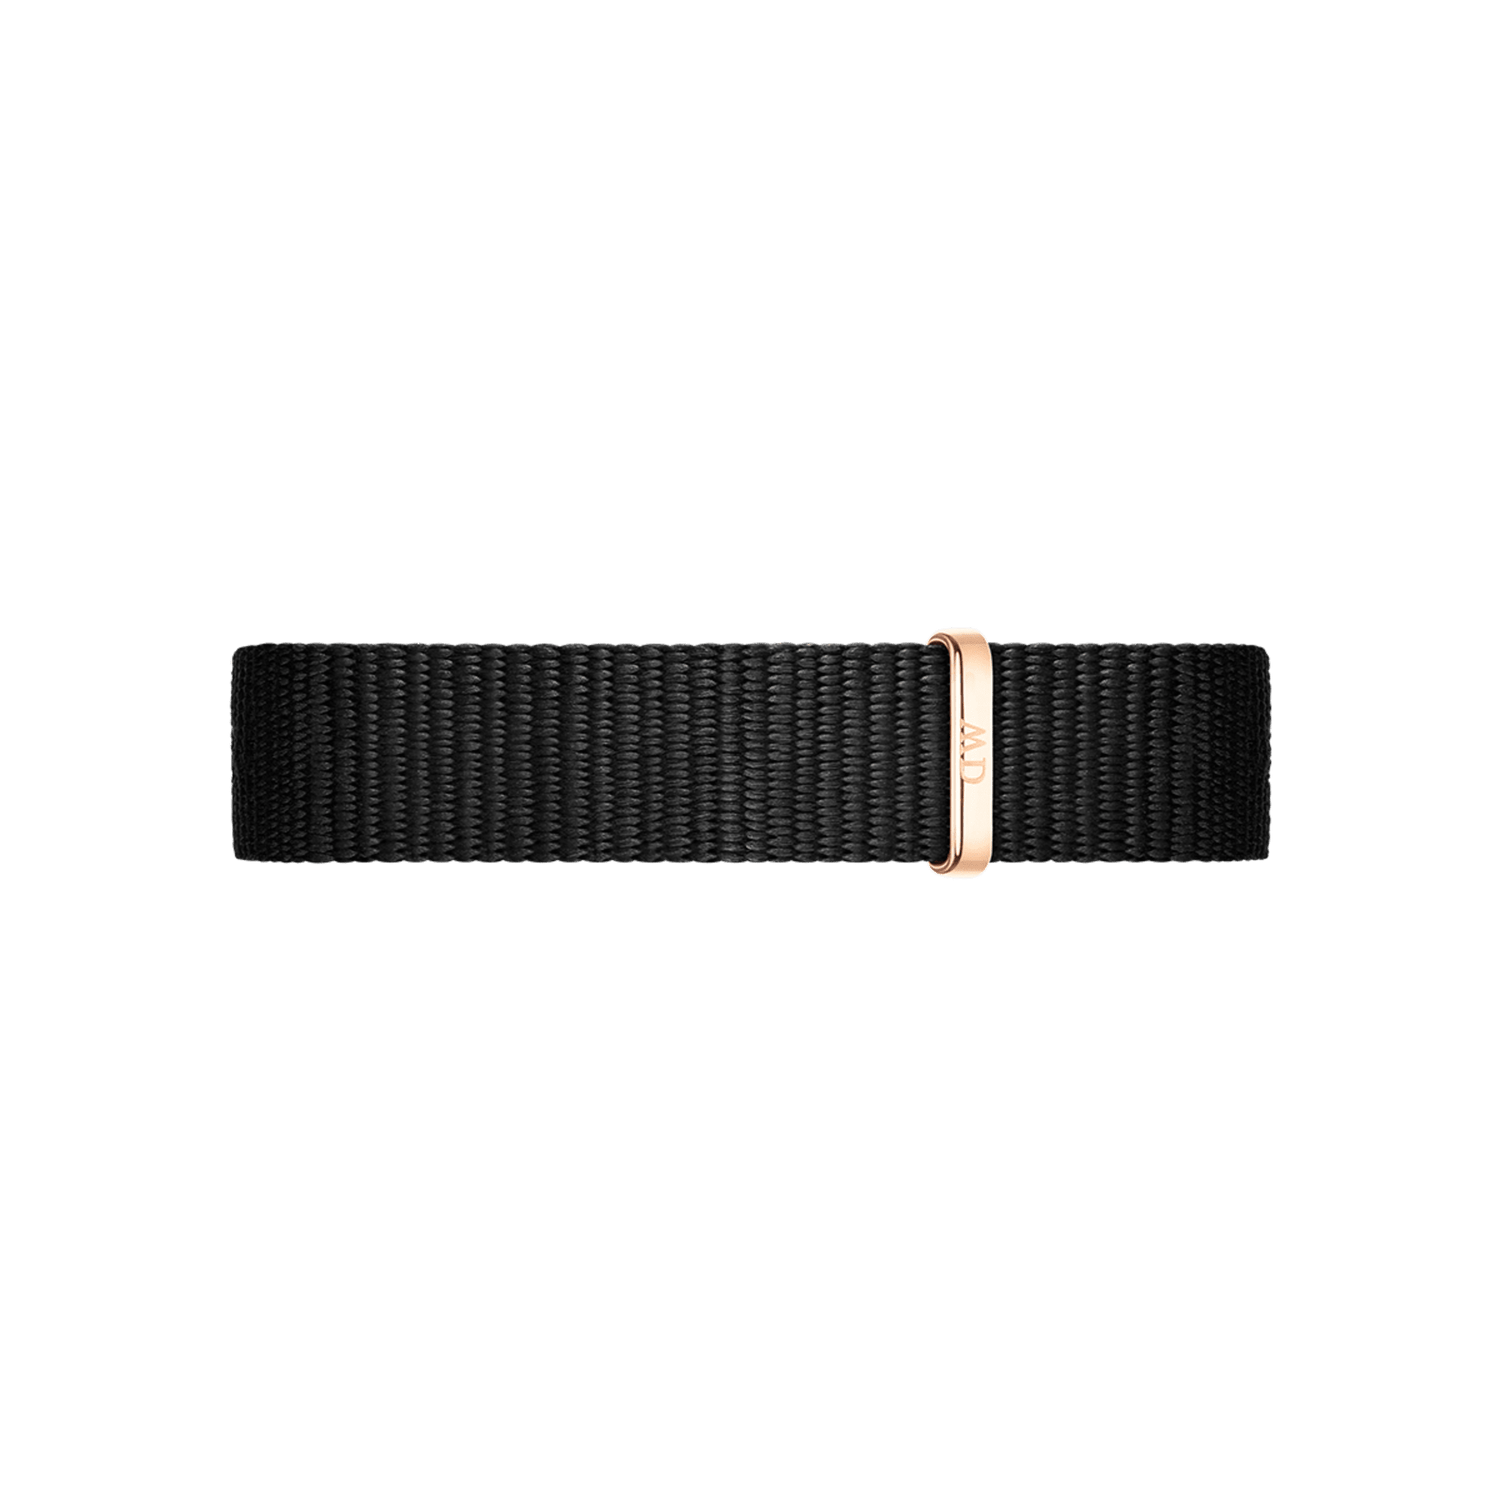 35 Apple Watch bands Dad will love for Father's Day - TODAY